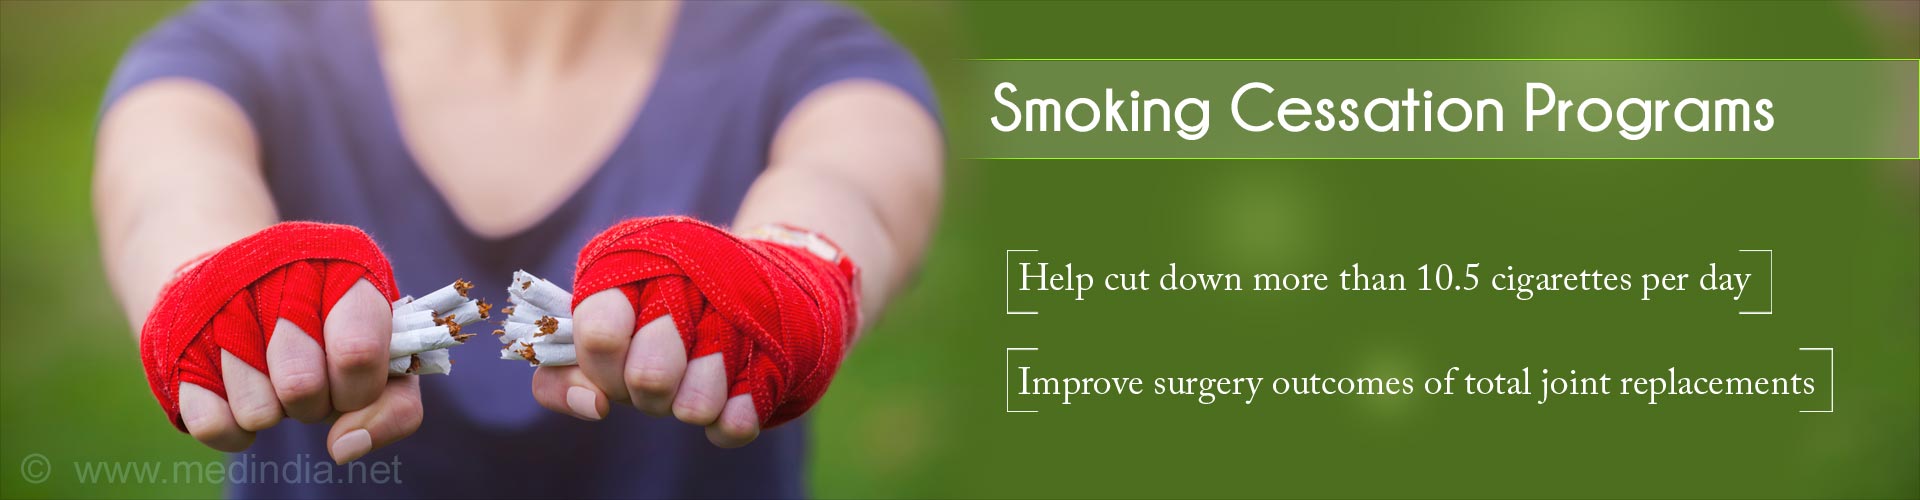 Smoking Cessation Programs
- Help cut down more than 10.5 cigarettes per day
- Improve surgery outcomes of total joint replacements
- Reduce risk of re-admission